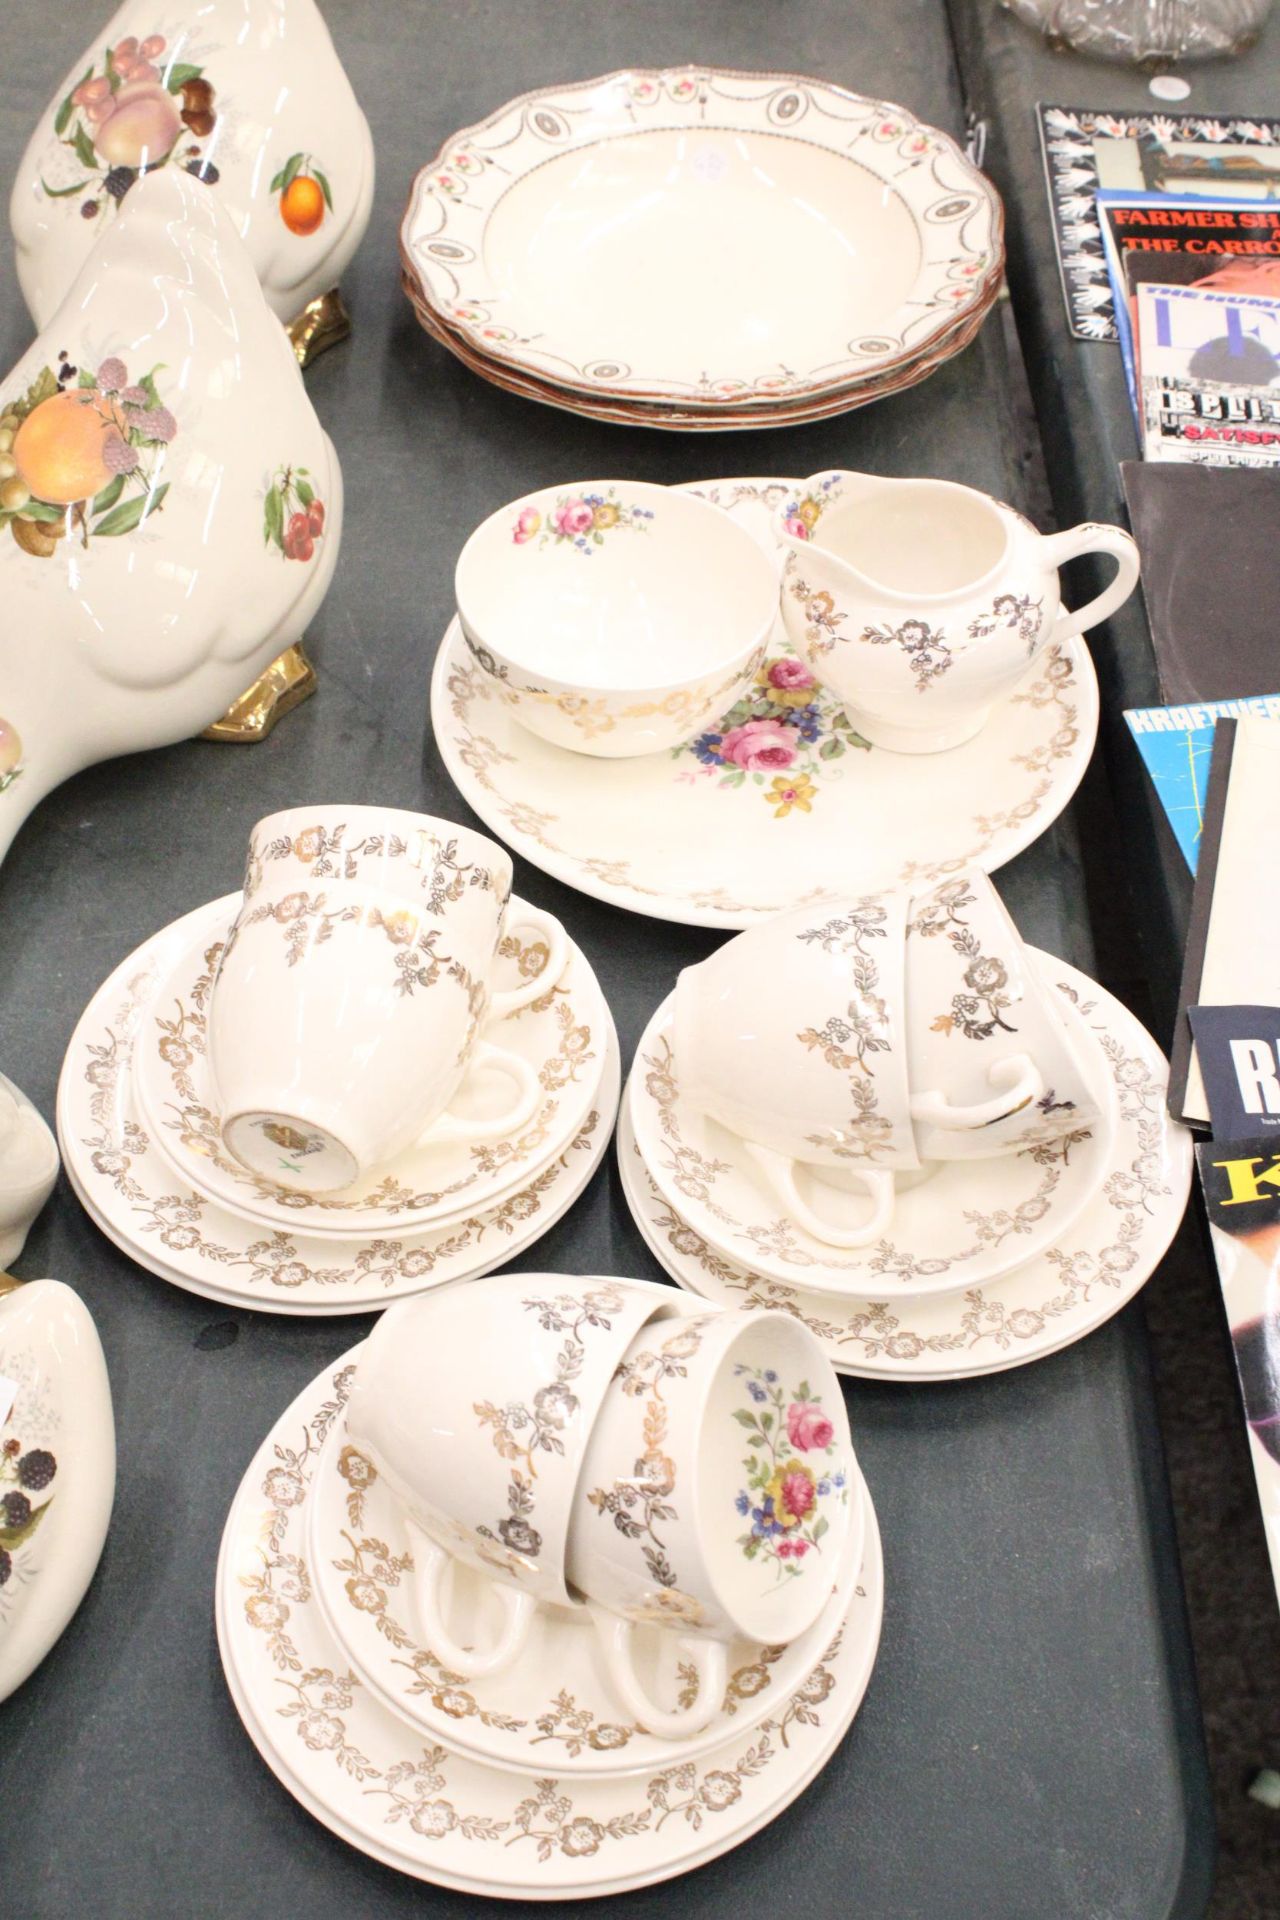 A QUANTITY OF VINTAGE TEAWARE TO INCLUDE, EMPIRE, CAKE PLATE, SUGAR BOWL, CREAM JUG, CUPS, SAUCERS